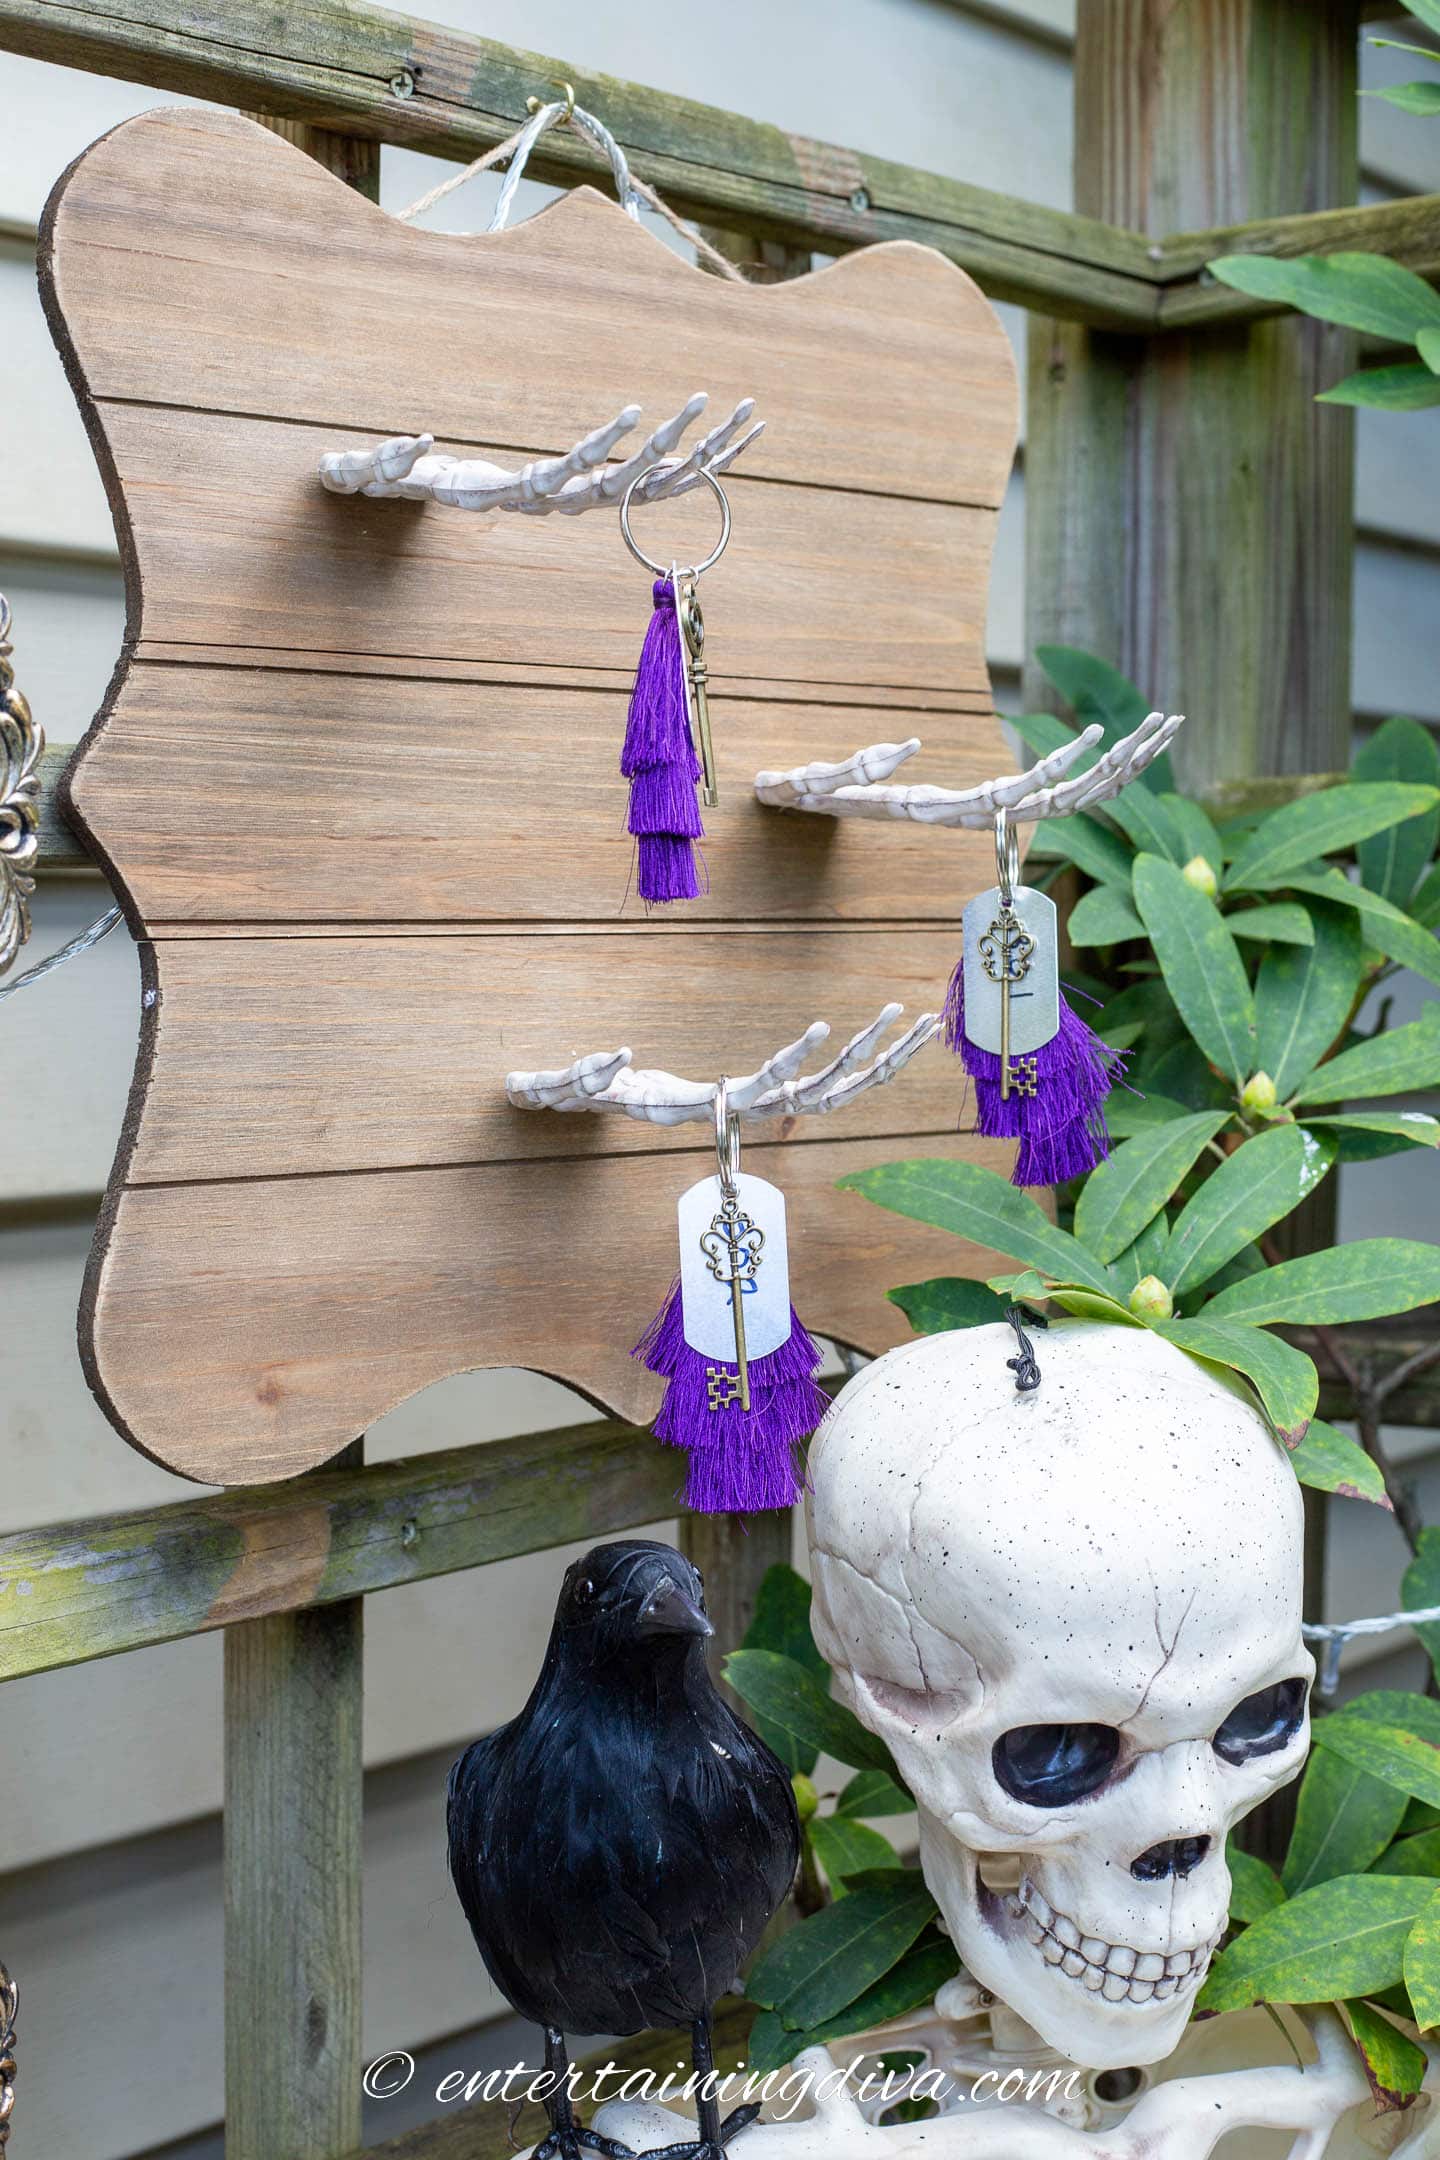 DIY skeleton hand Halloween wall decor with old fashioned keys hung from it